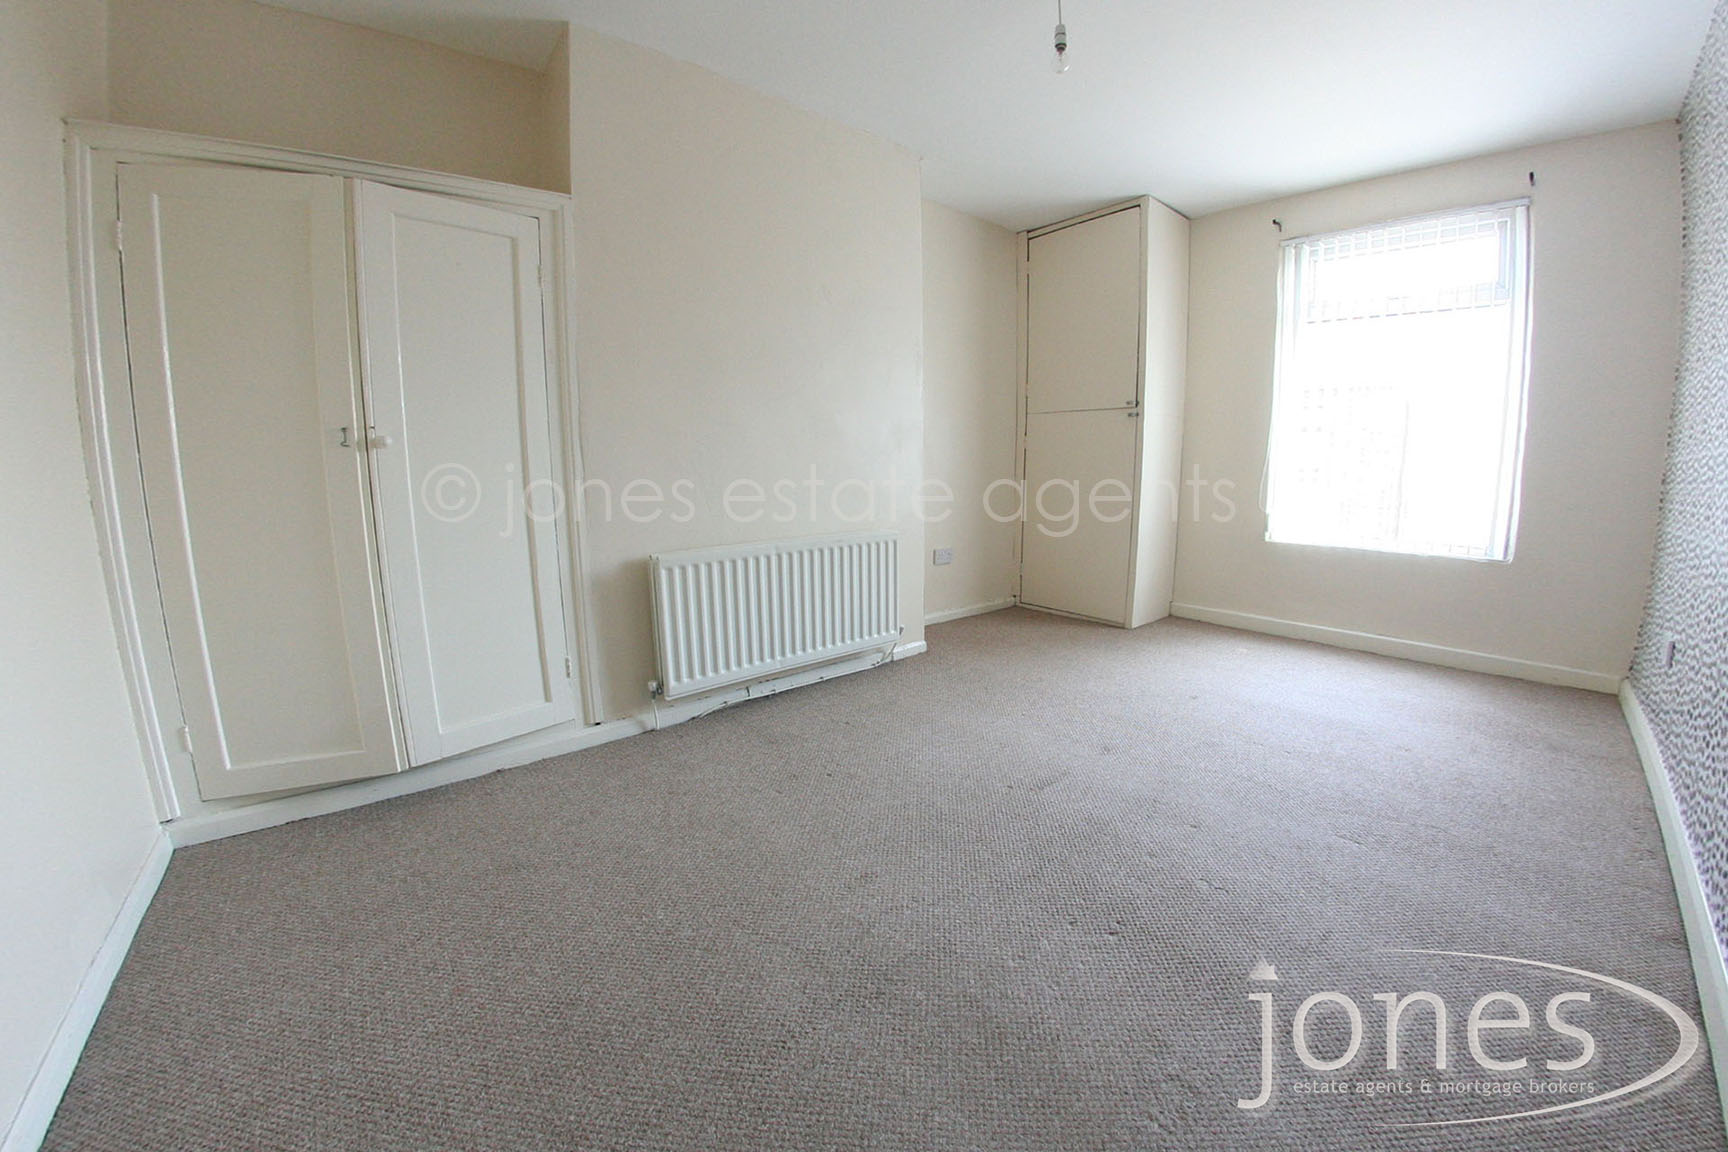 Home for Sale Let - Photo 06 North Road West,Wingate,TS28 5AP